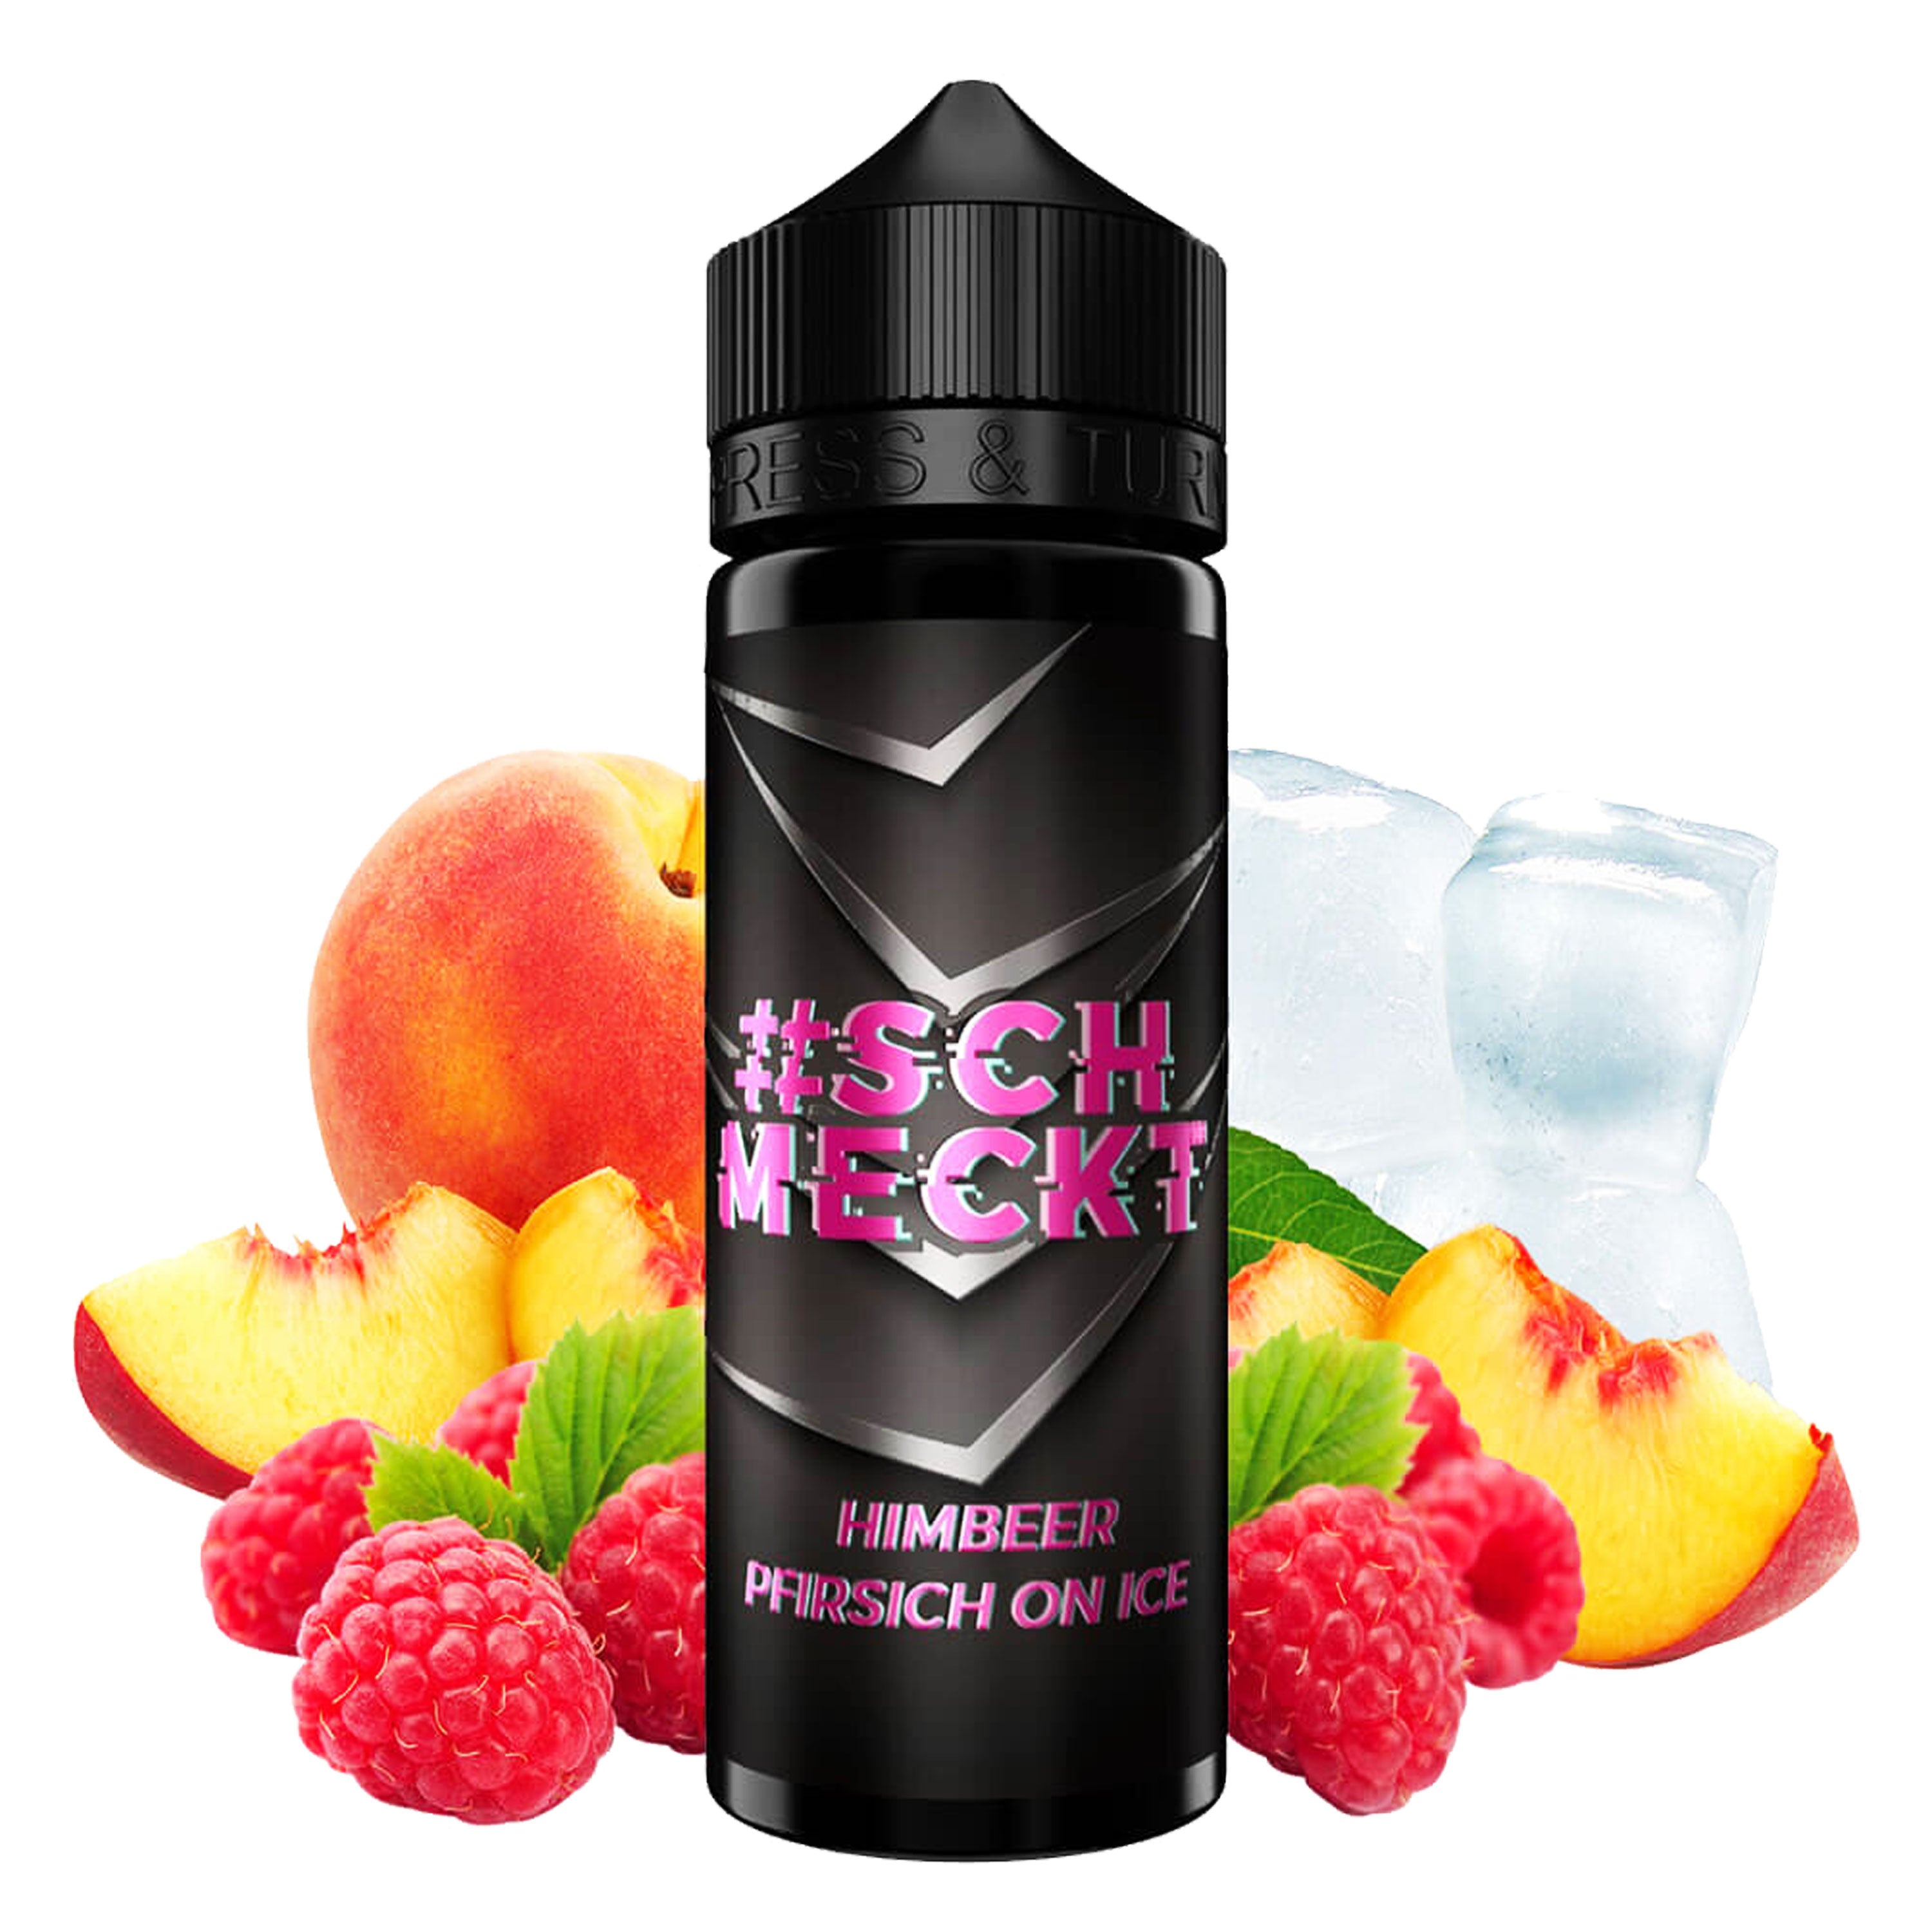 #Schmeckt - Himbeer Pfirsich on Ice - Longfill Aroma 10 ml